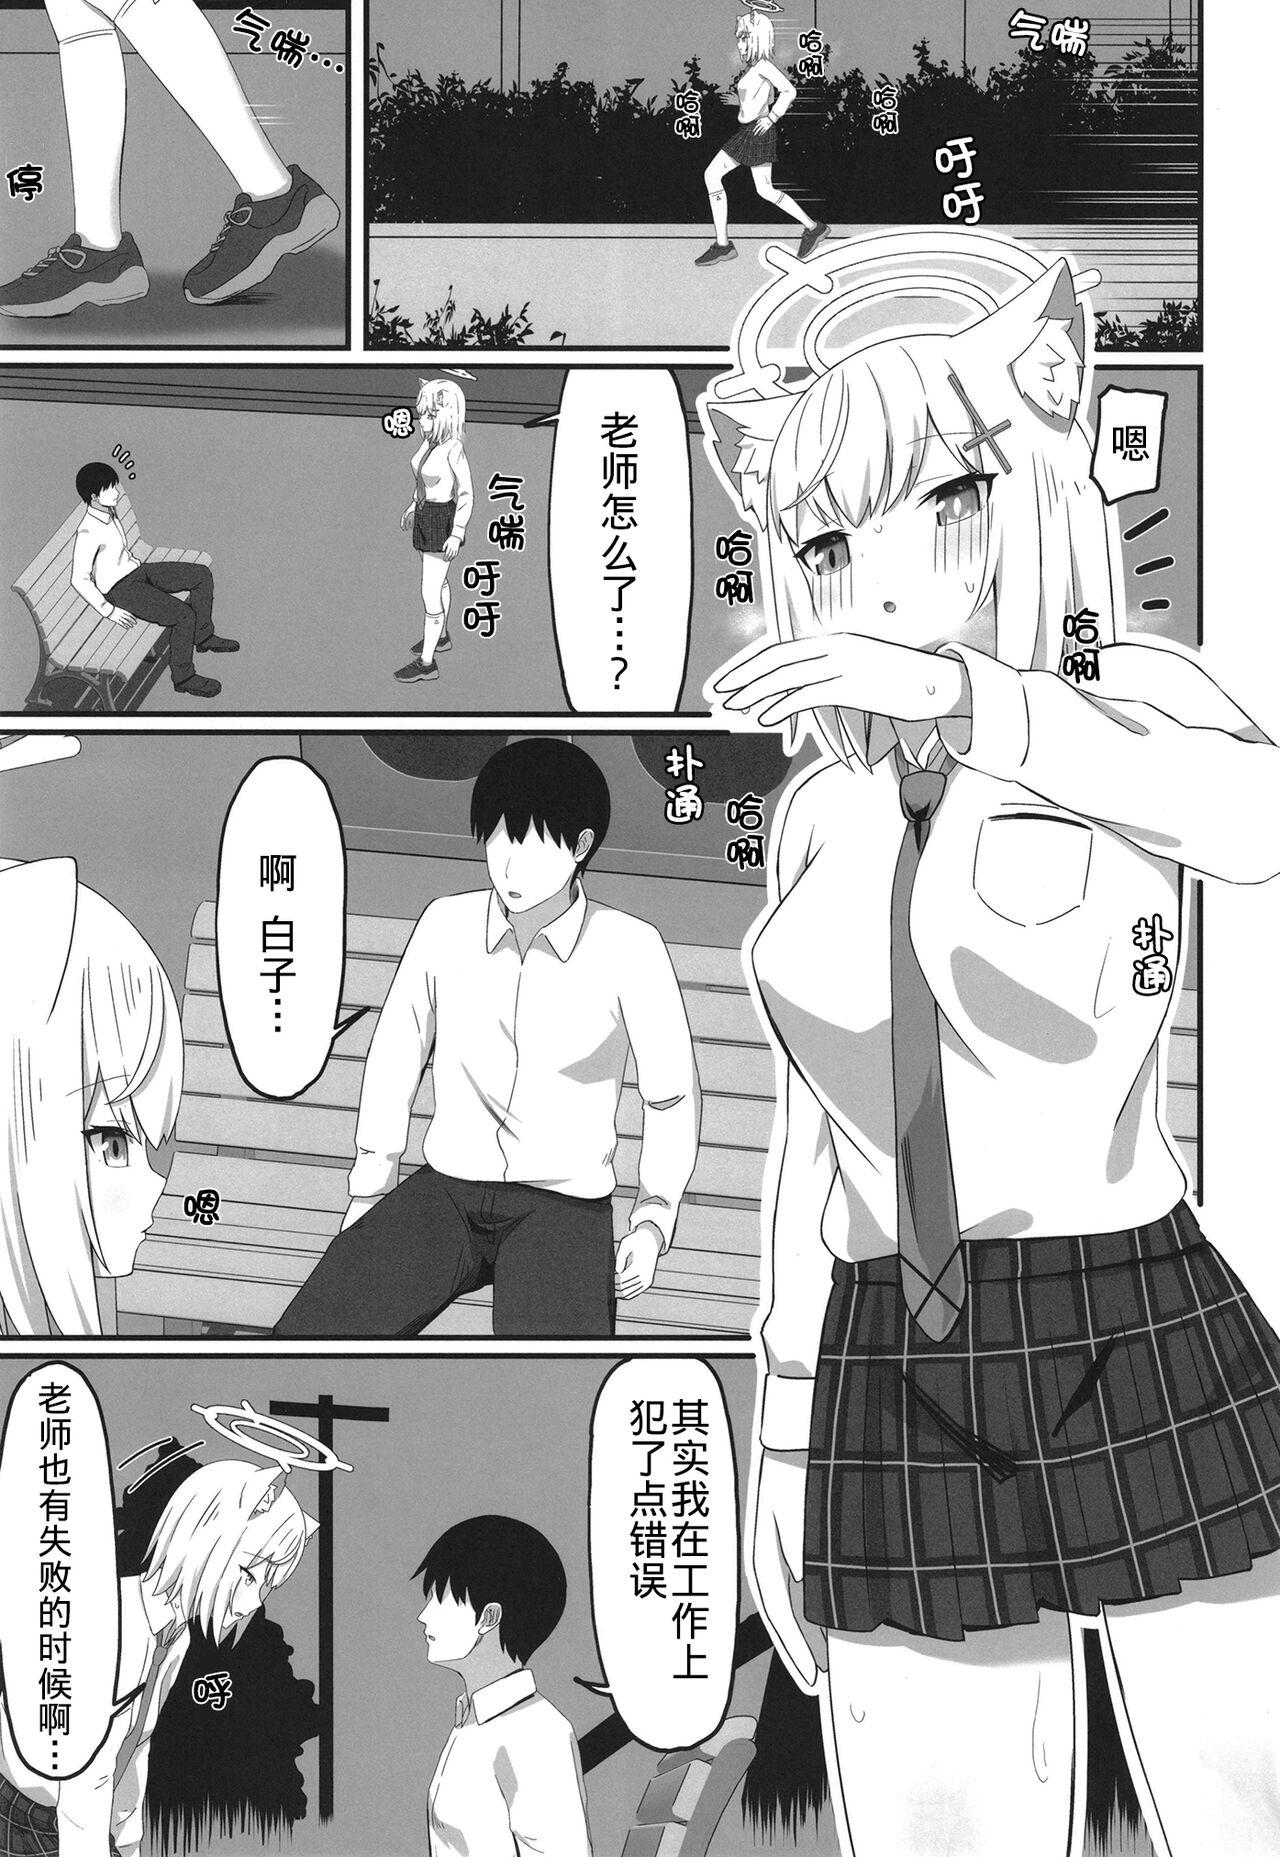 Transsexual houka go no himitu - Blue archive Animated - Page 4